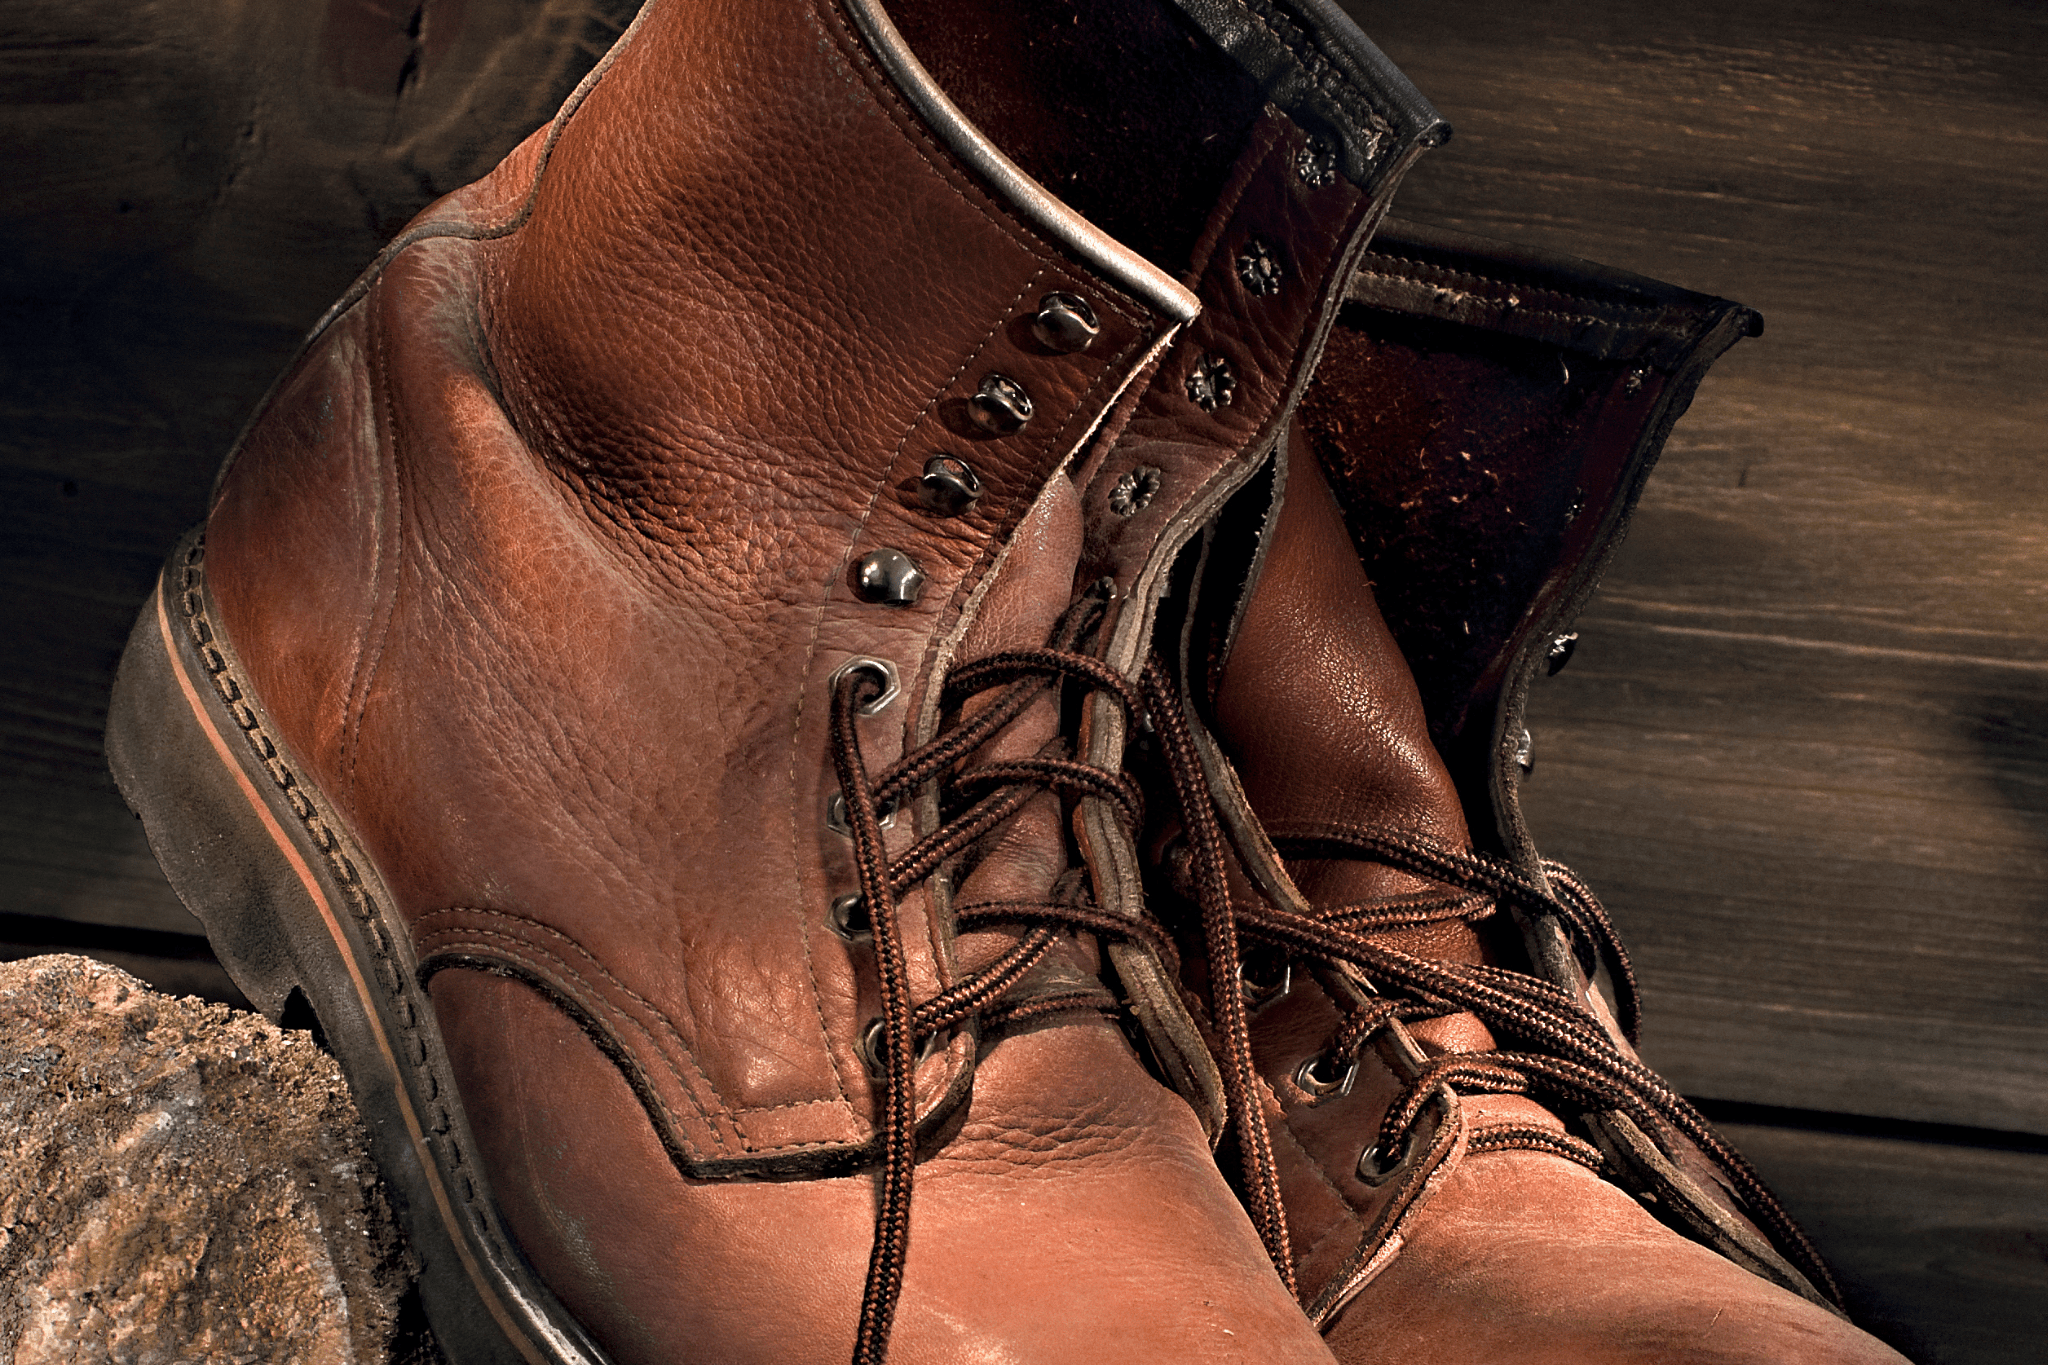 best steel toe work boots for standing on concrete all day